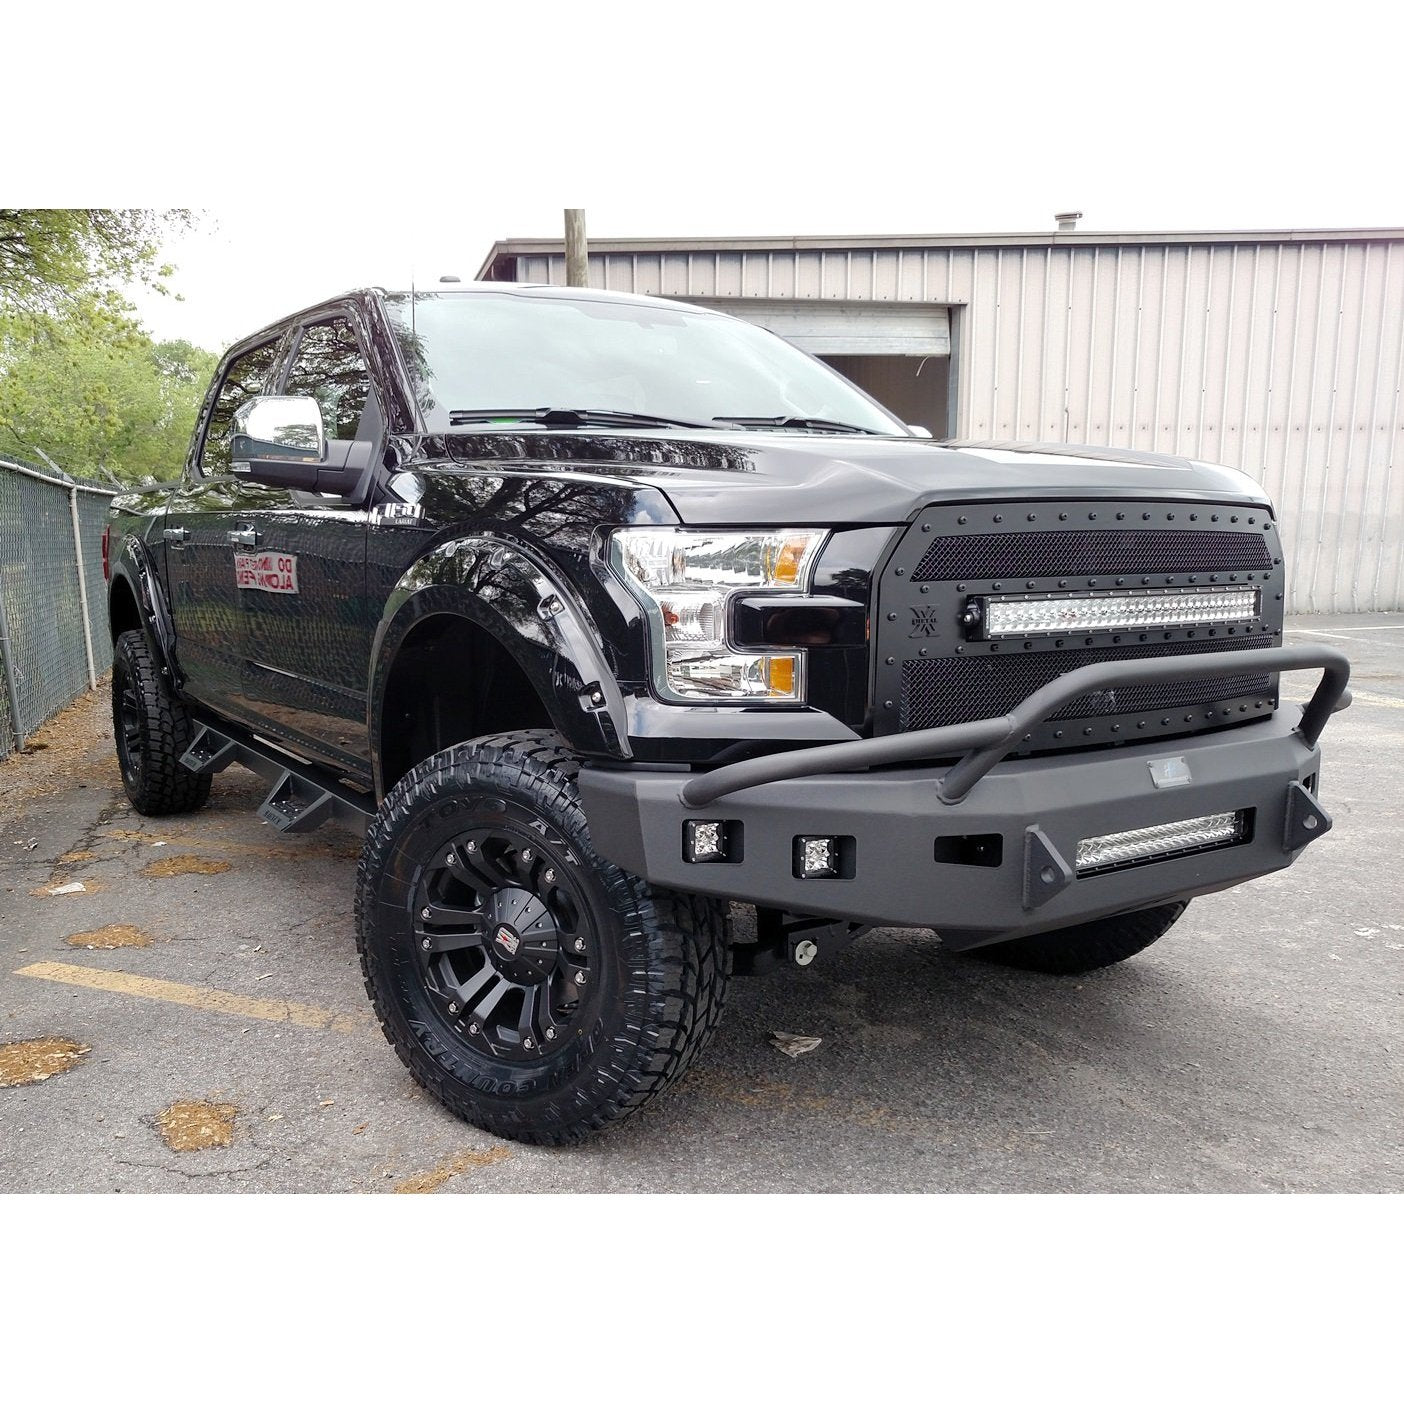 HammerHead 600-56-0385 Low Profile Pre-Runner Front Bumper Ford F150 2015-2017